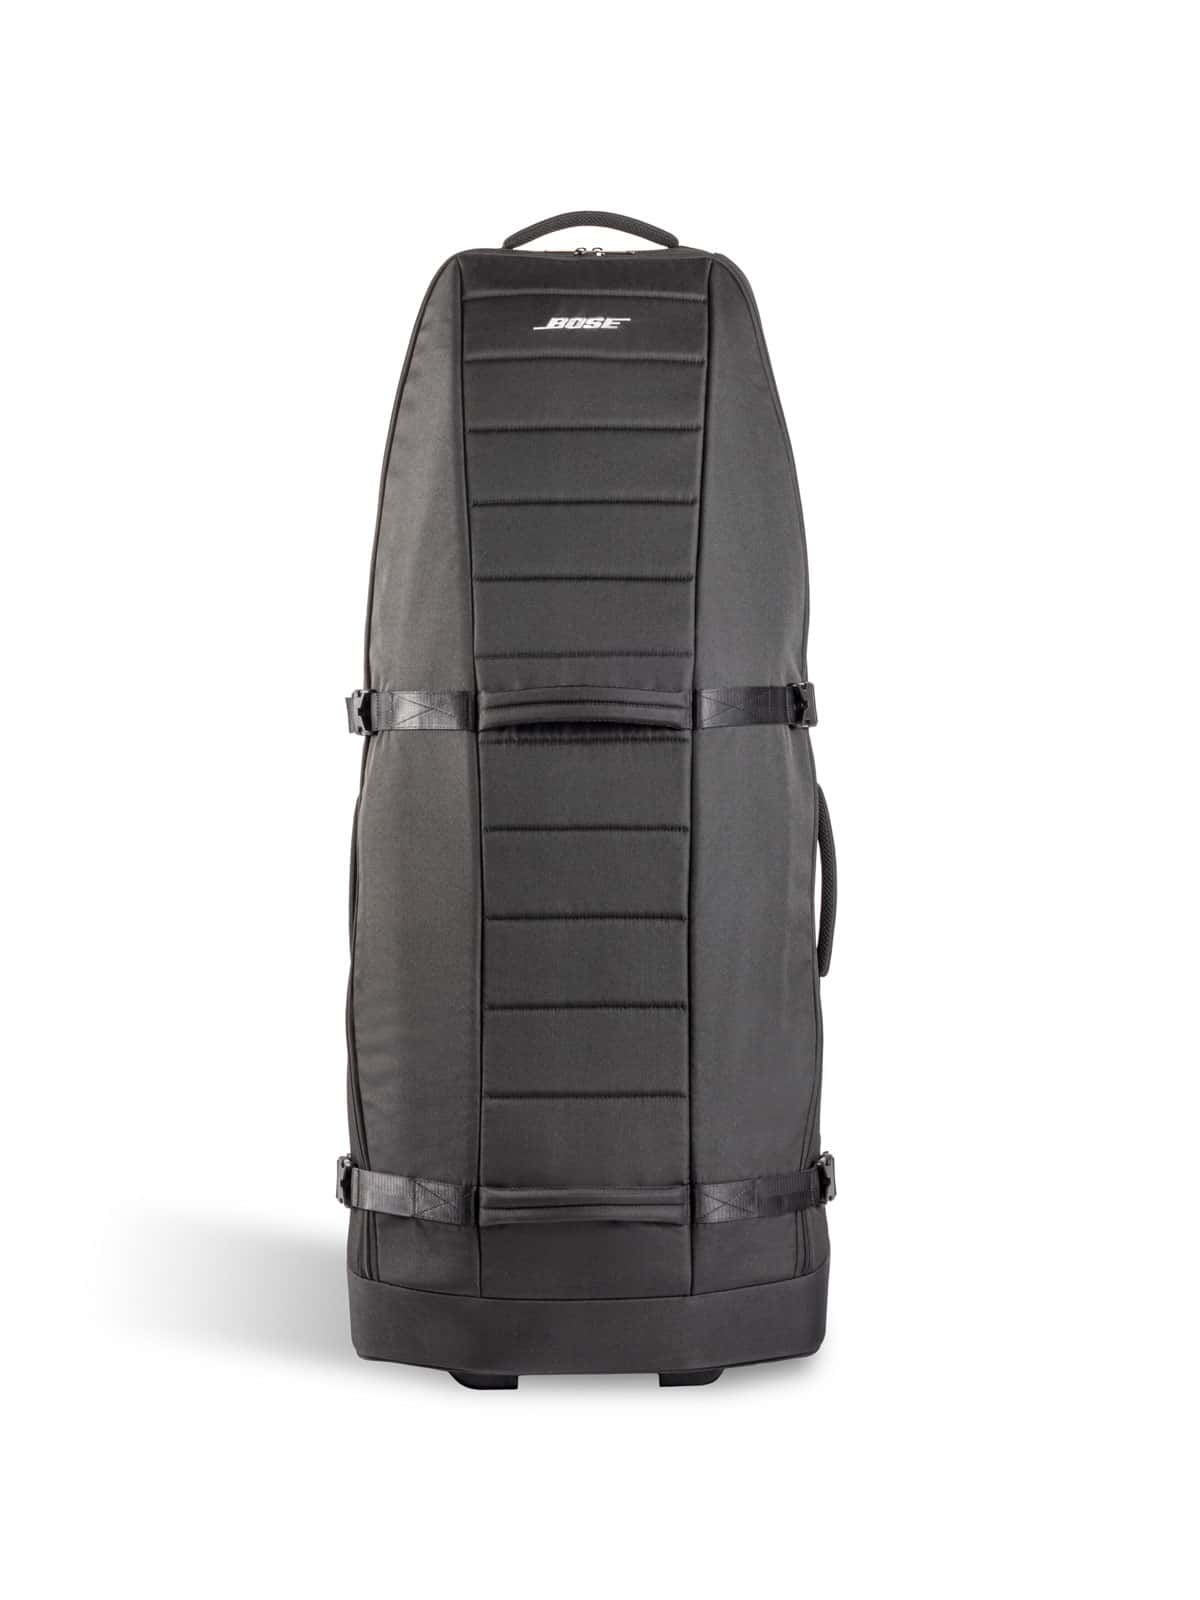 BOSE PROFESSIONAL L1 PRO16 - CARRY BAG ON WHEELS - SECOND HAND